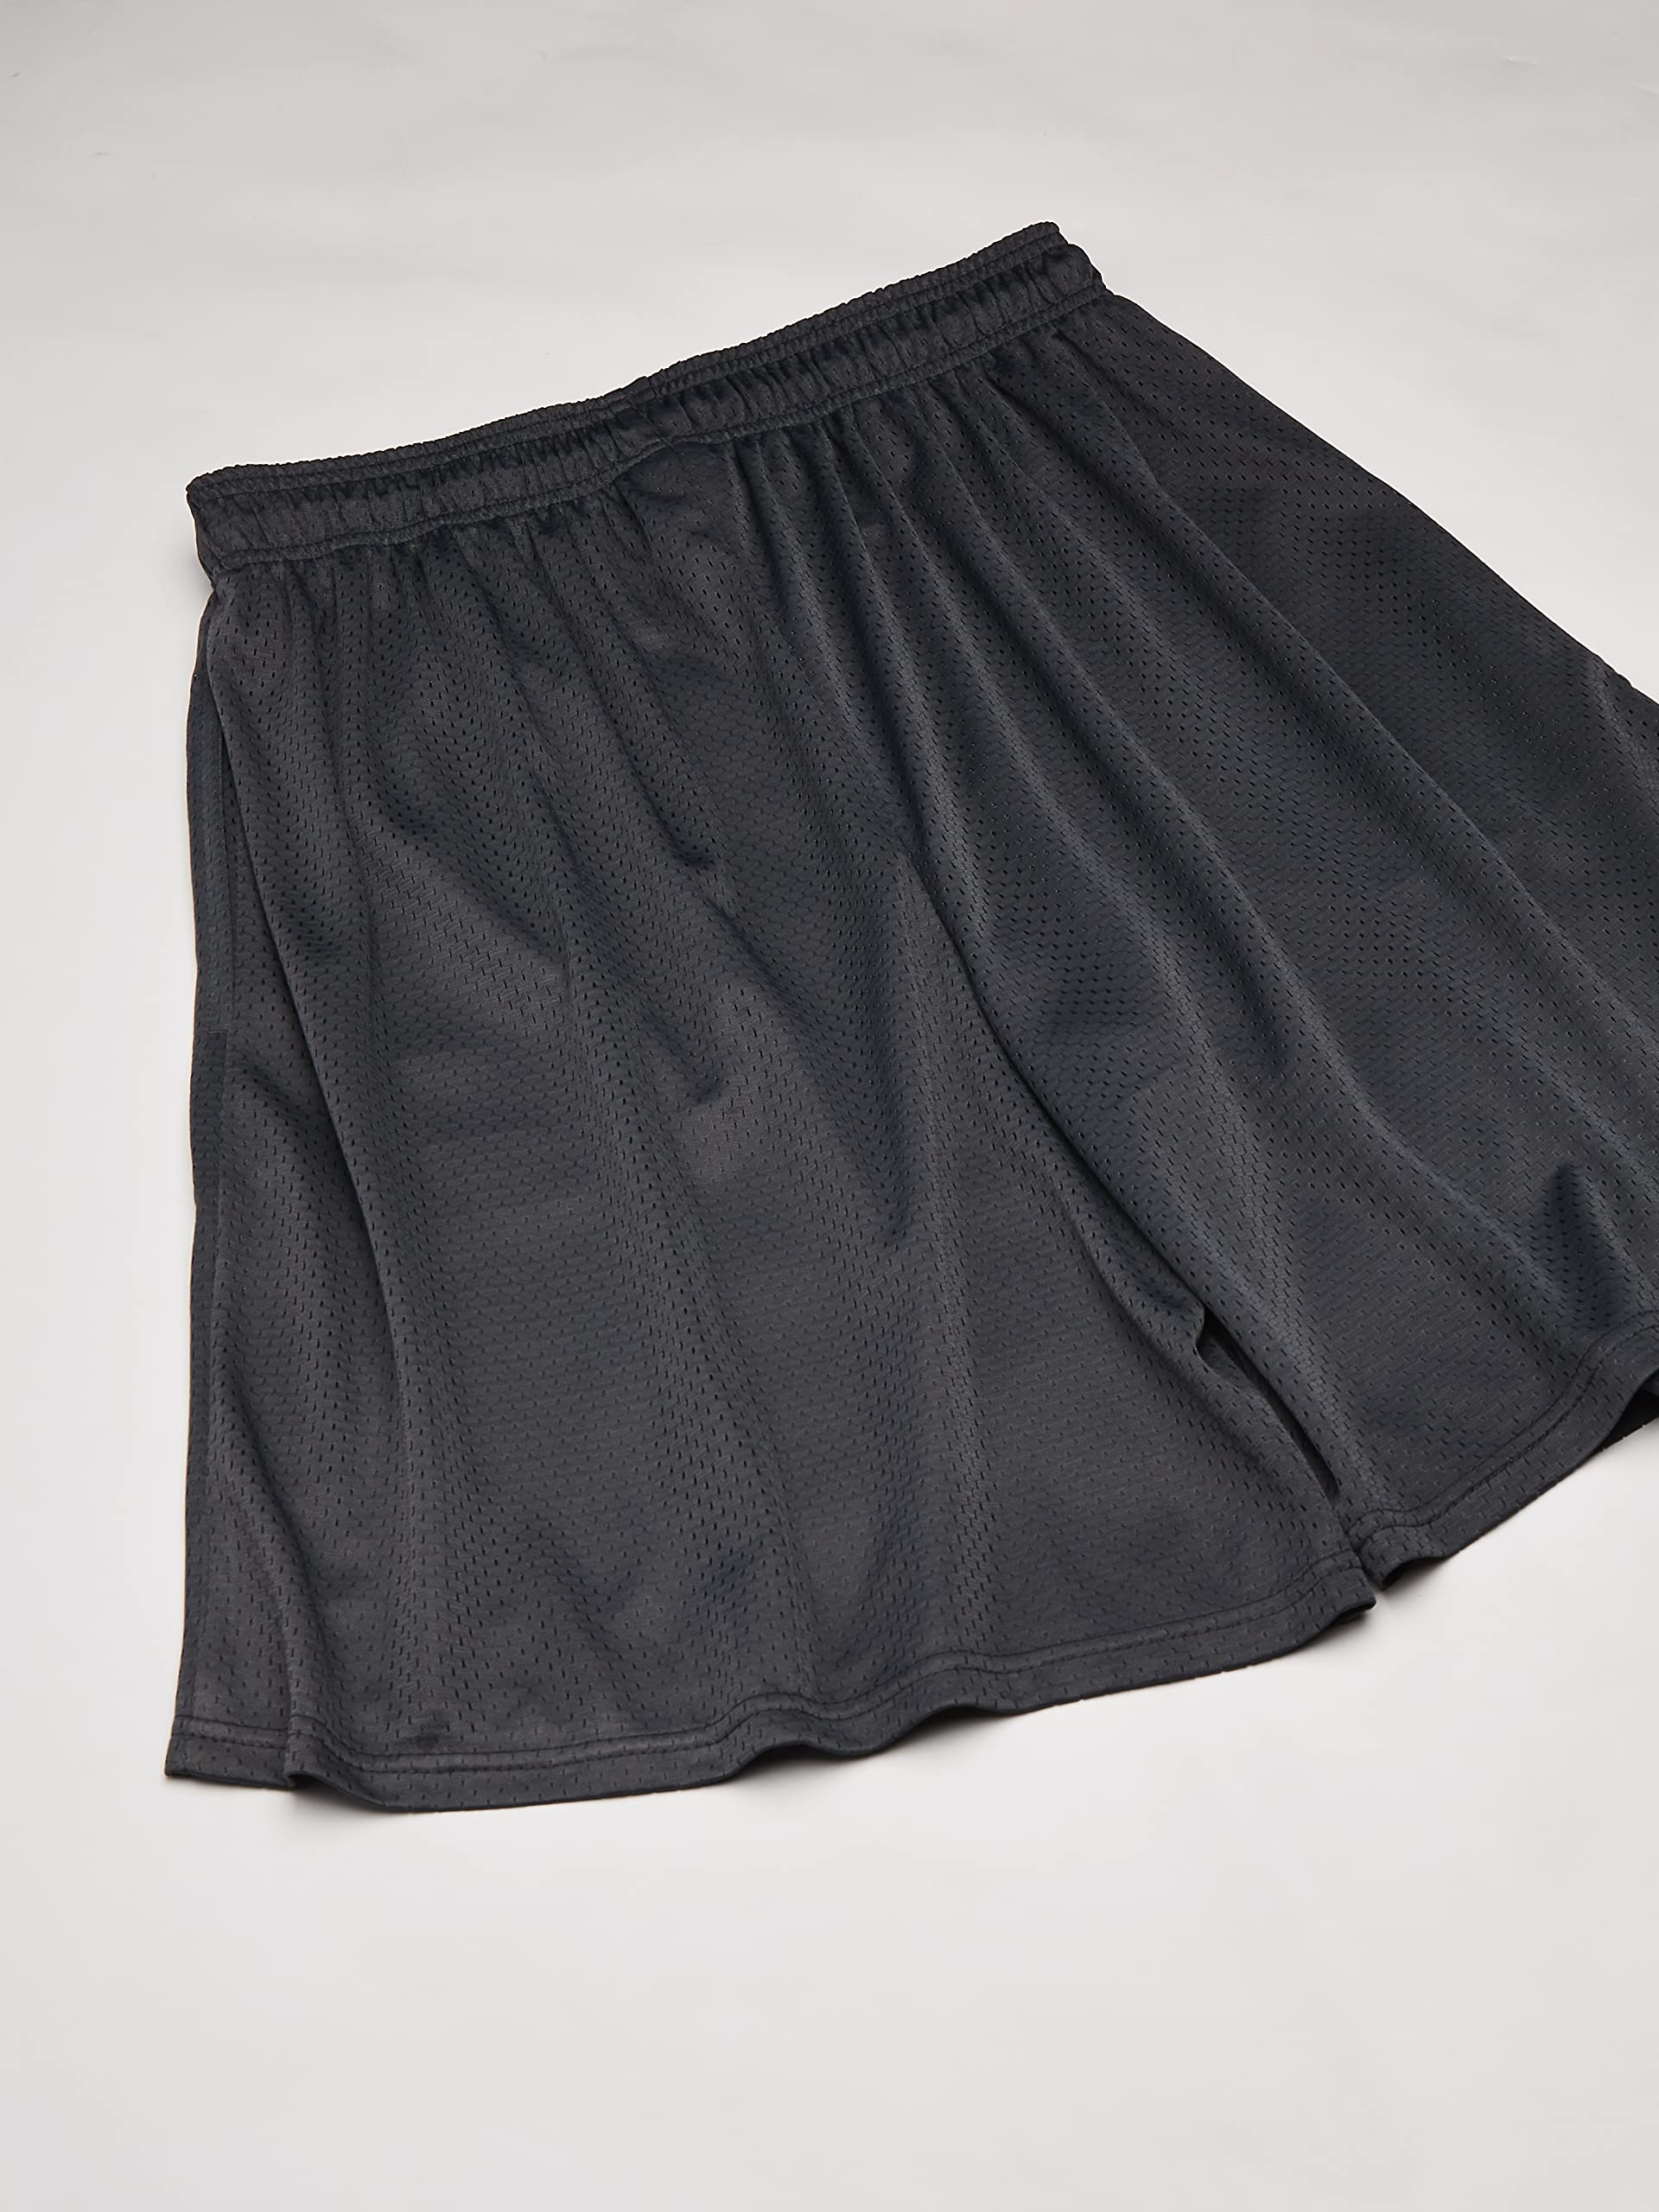 Russell Athletics Men's Mesh Shorts - Versatile Workout Attire with Pockets, Dry Fit Performance for Gym and Workouts